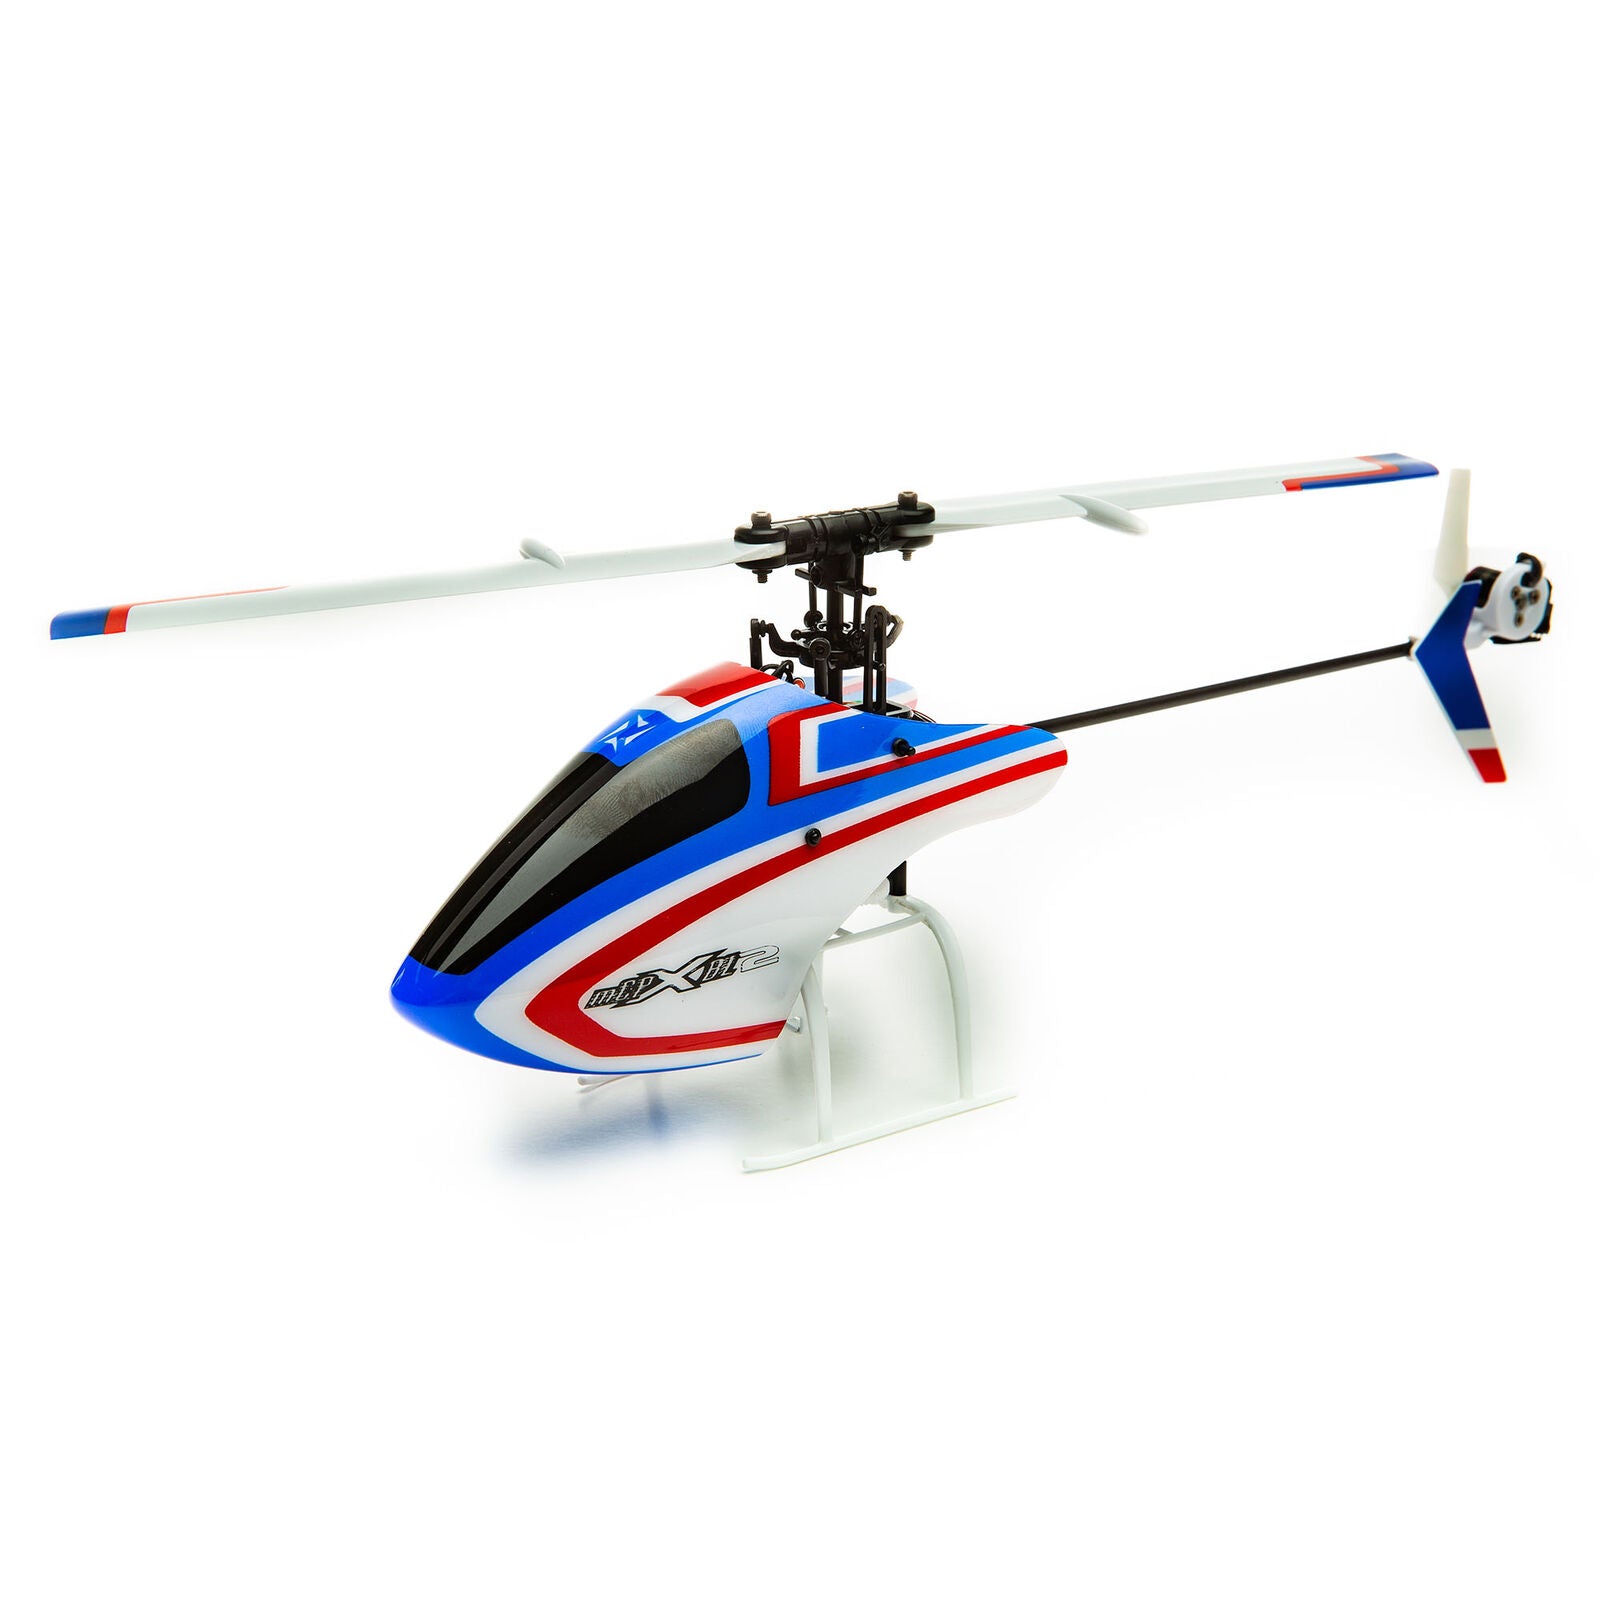 EFLITE BLADE BLH6050 mCPX BL2 BNF Basic with AS3X and SAFE